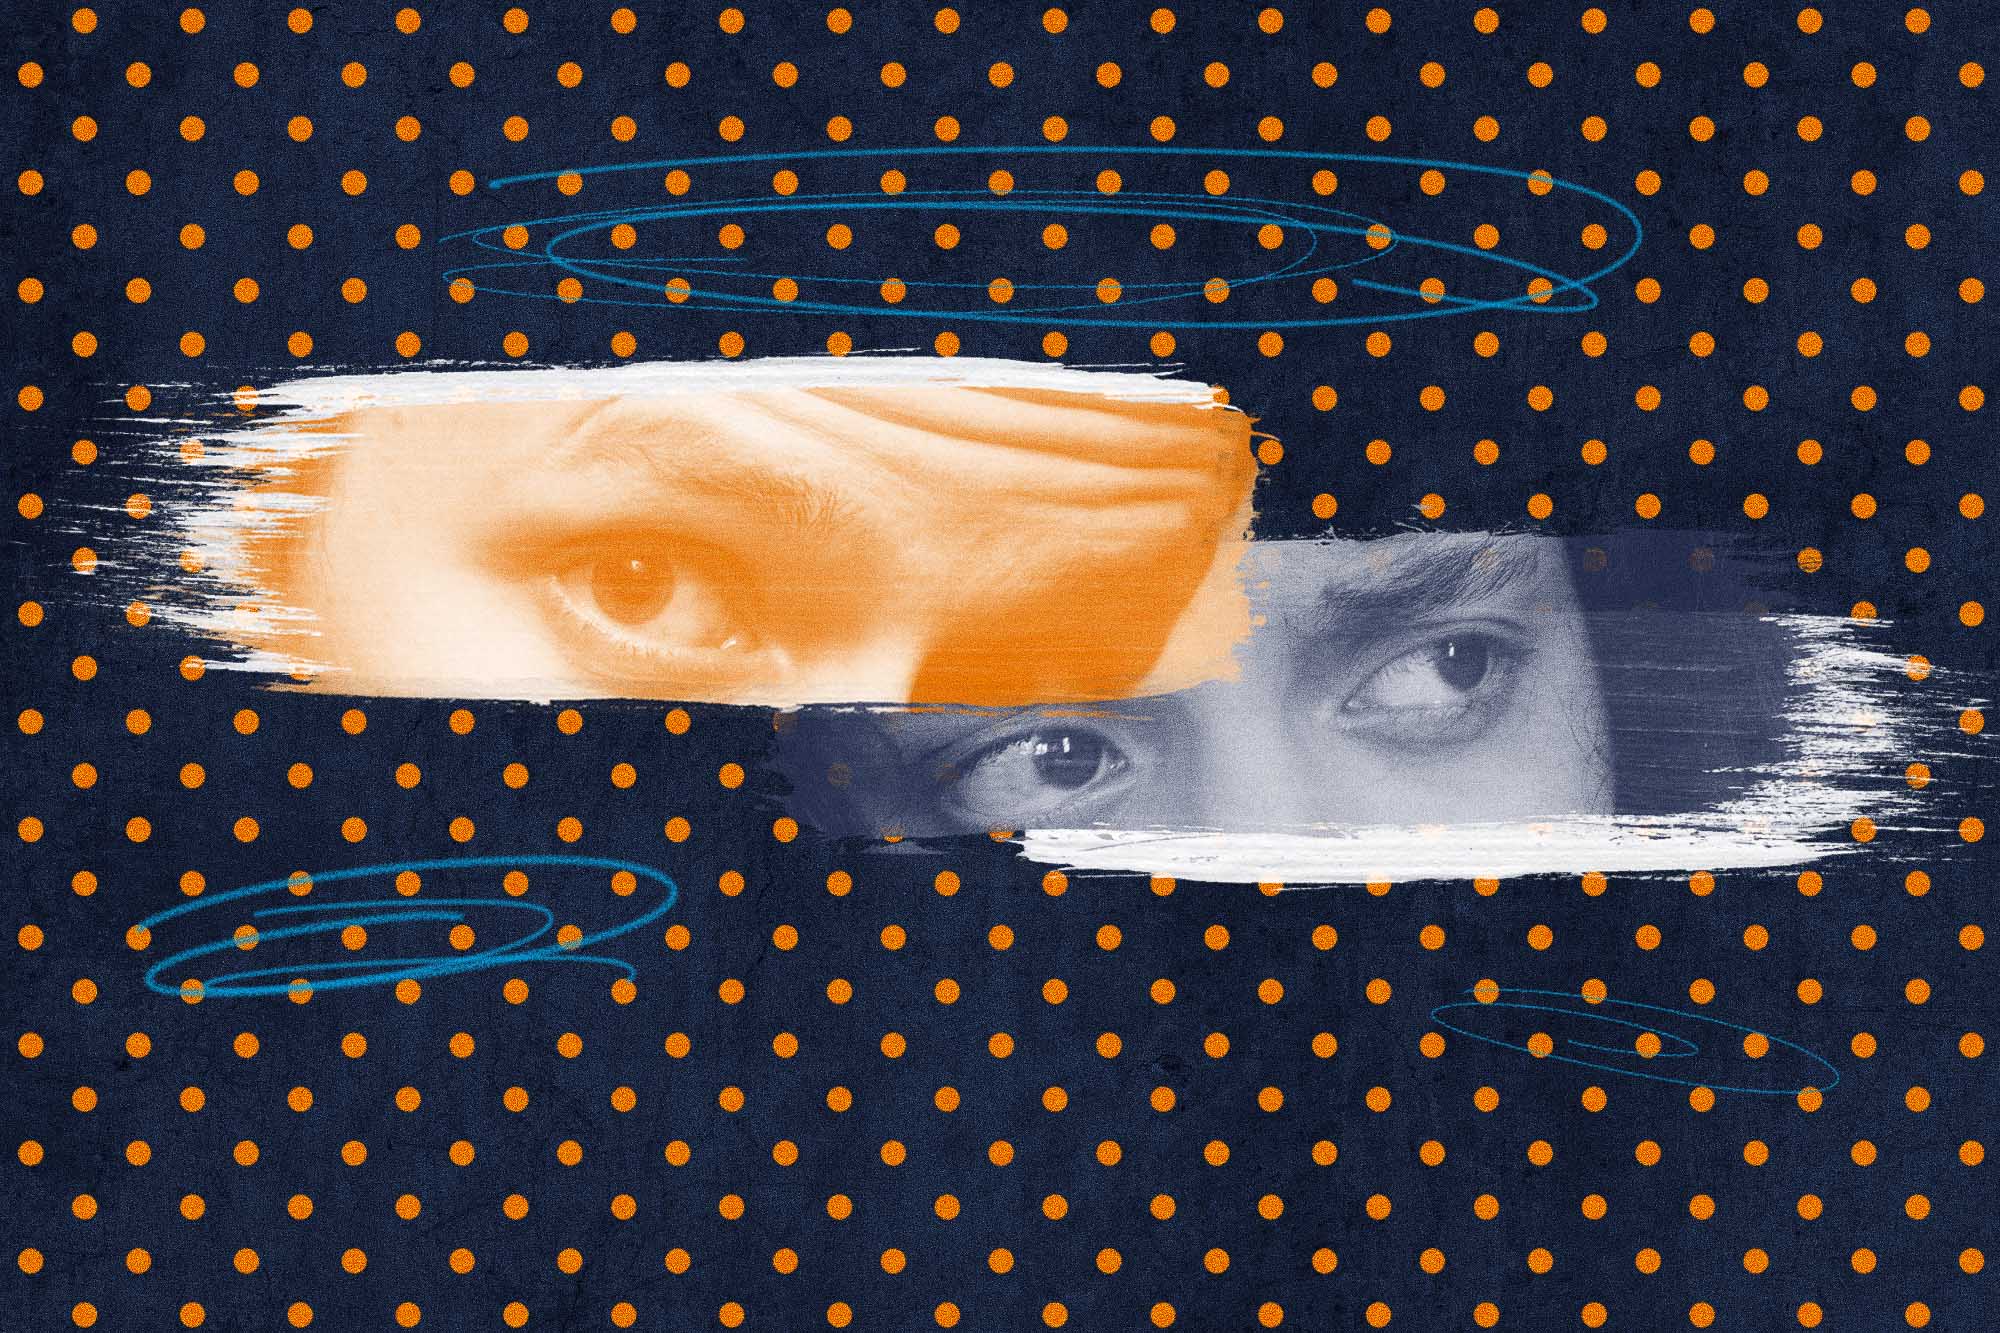 Illustration of a orange polka dot background with to faces where you can only see their eyes